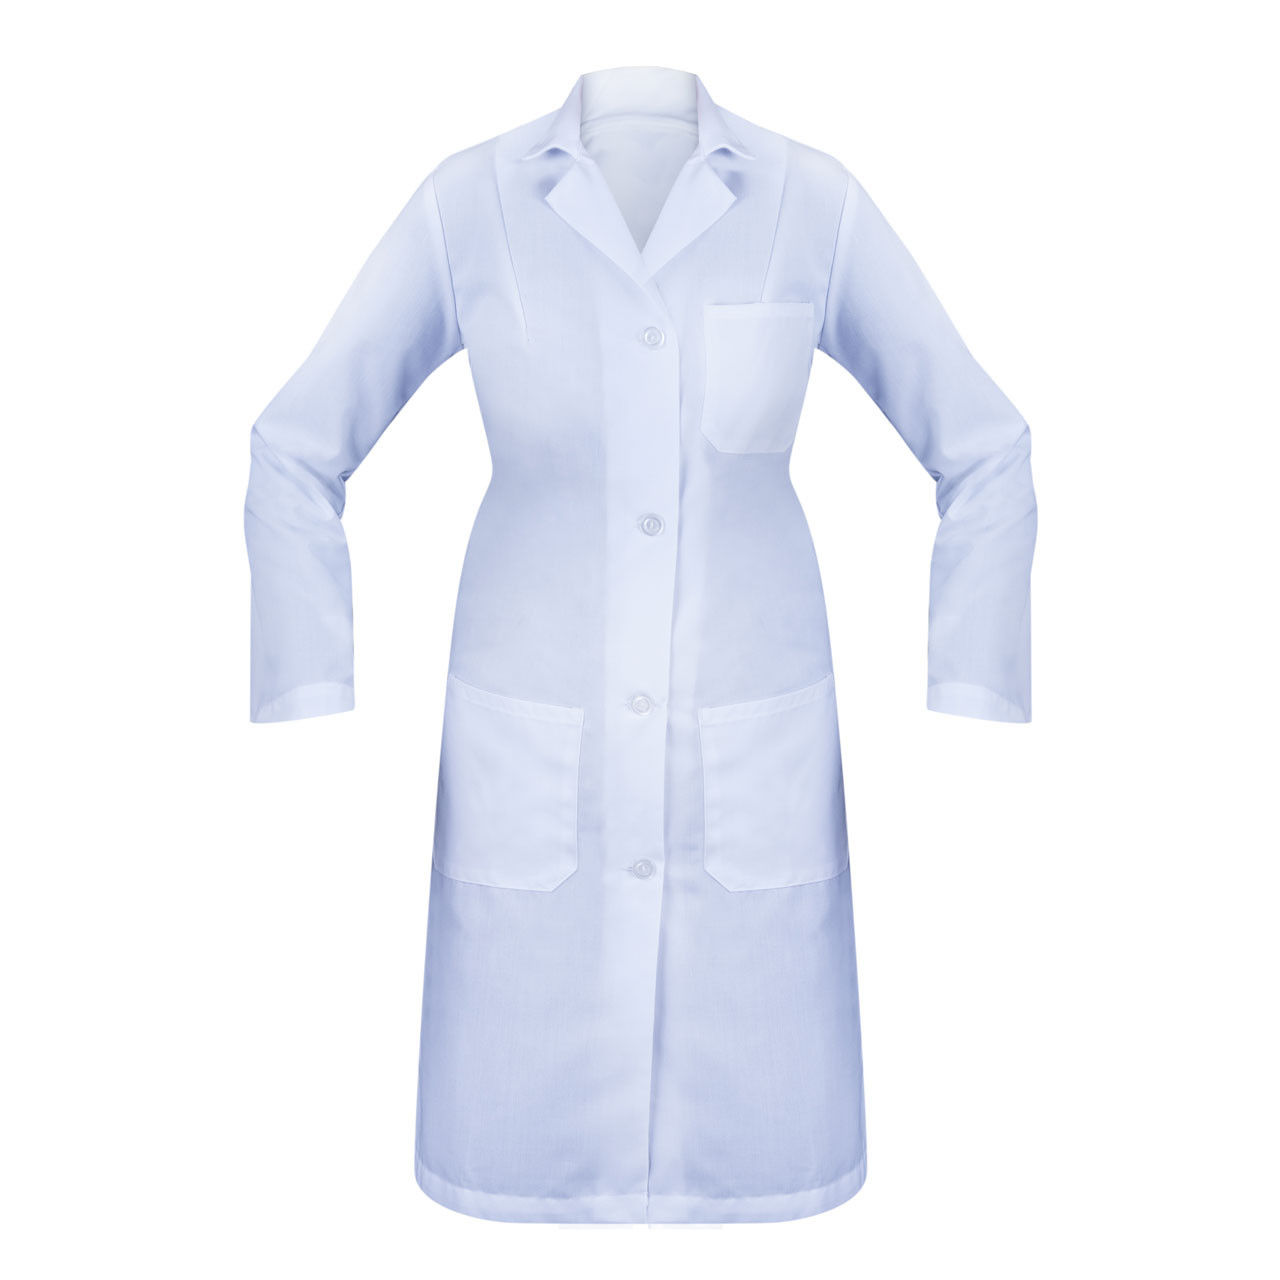 What is the weight of the fabric used in the Female Lab Coat?